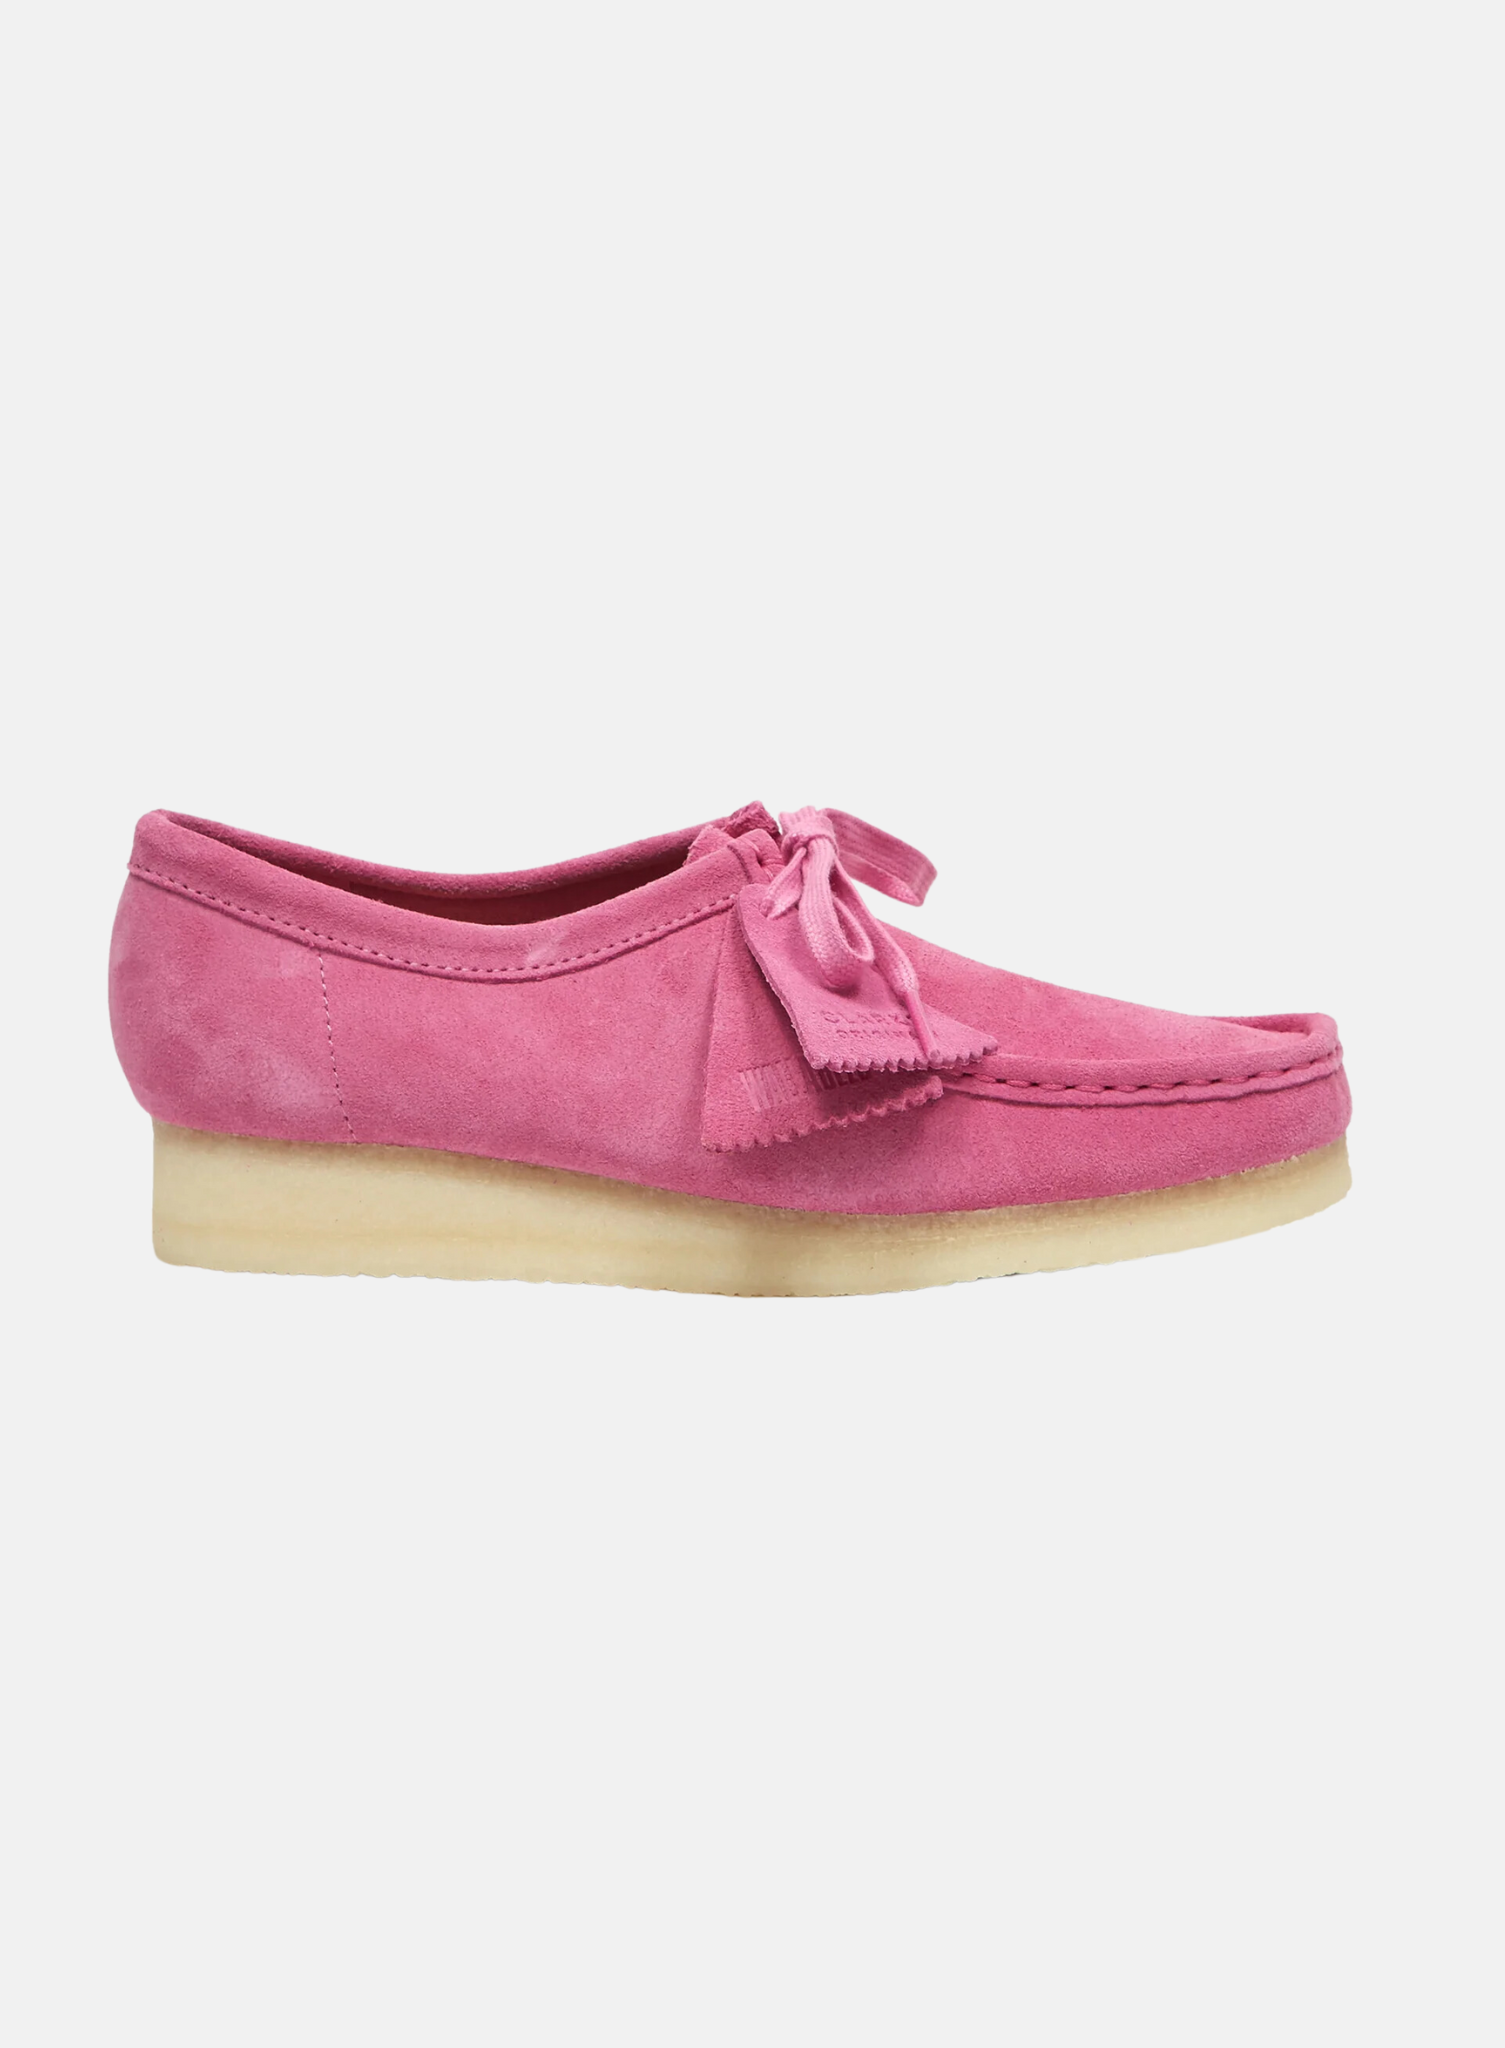 Clarks Wallabee Suede Pink - Hympala Store 